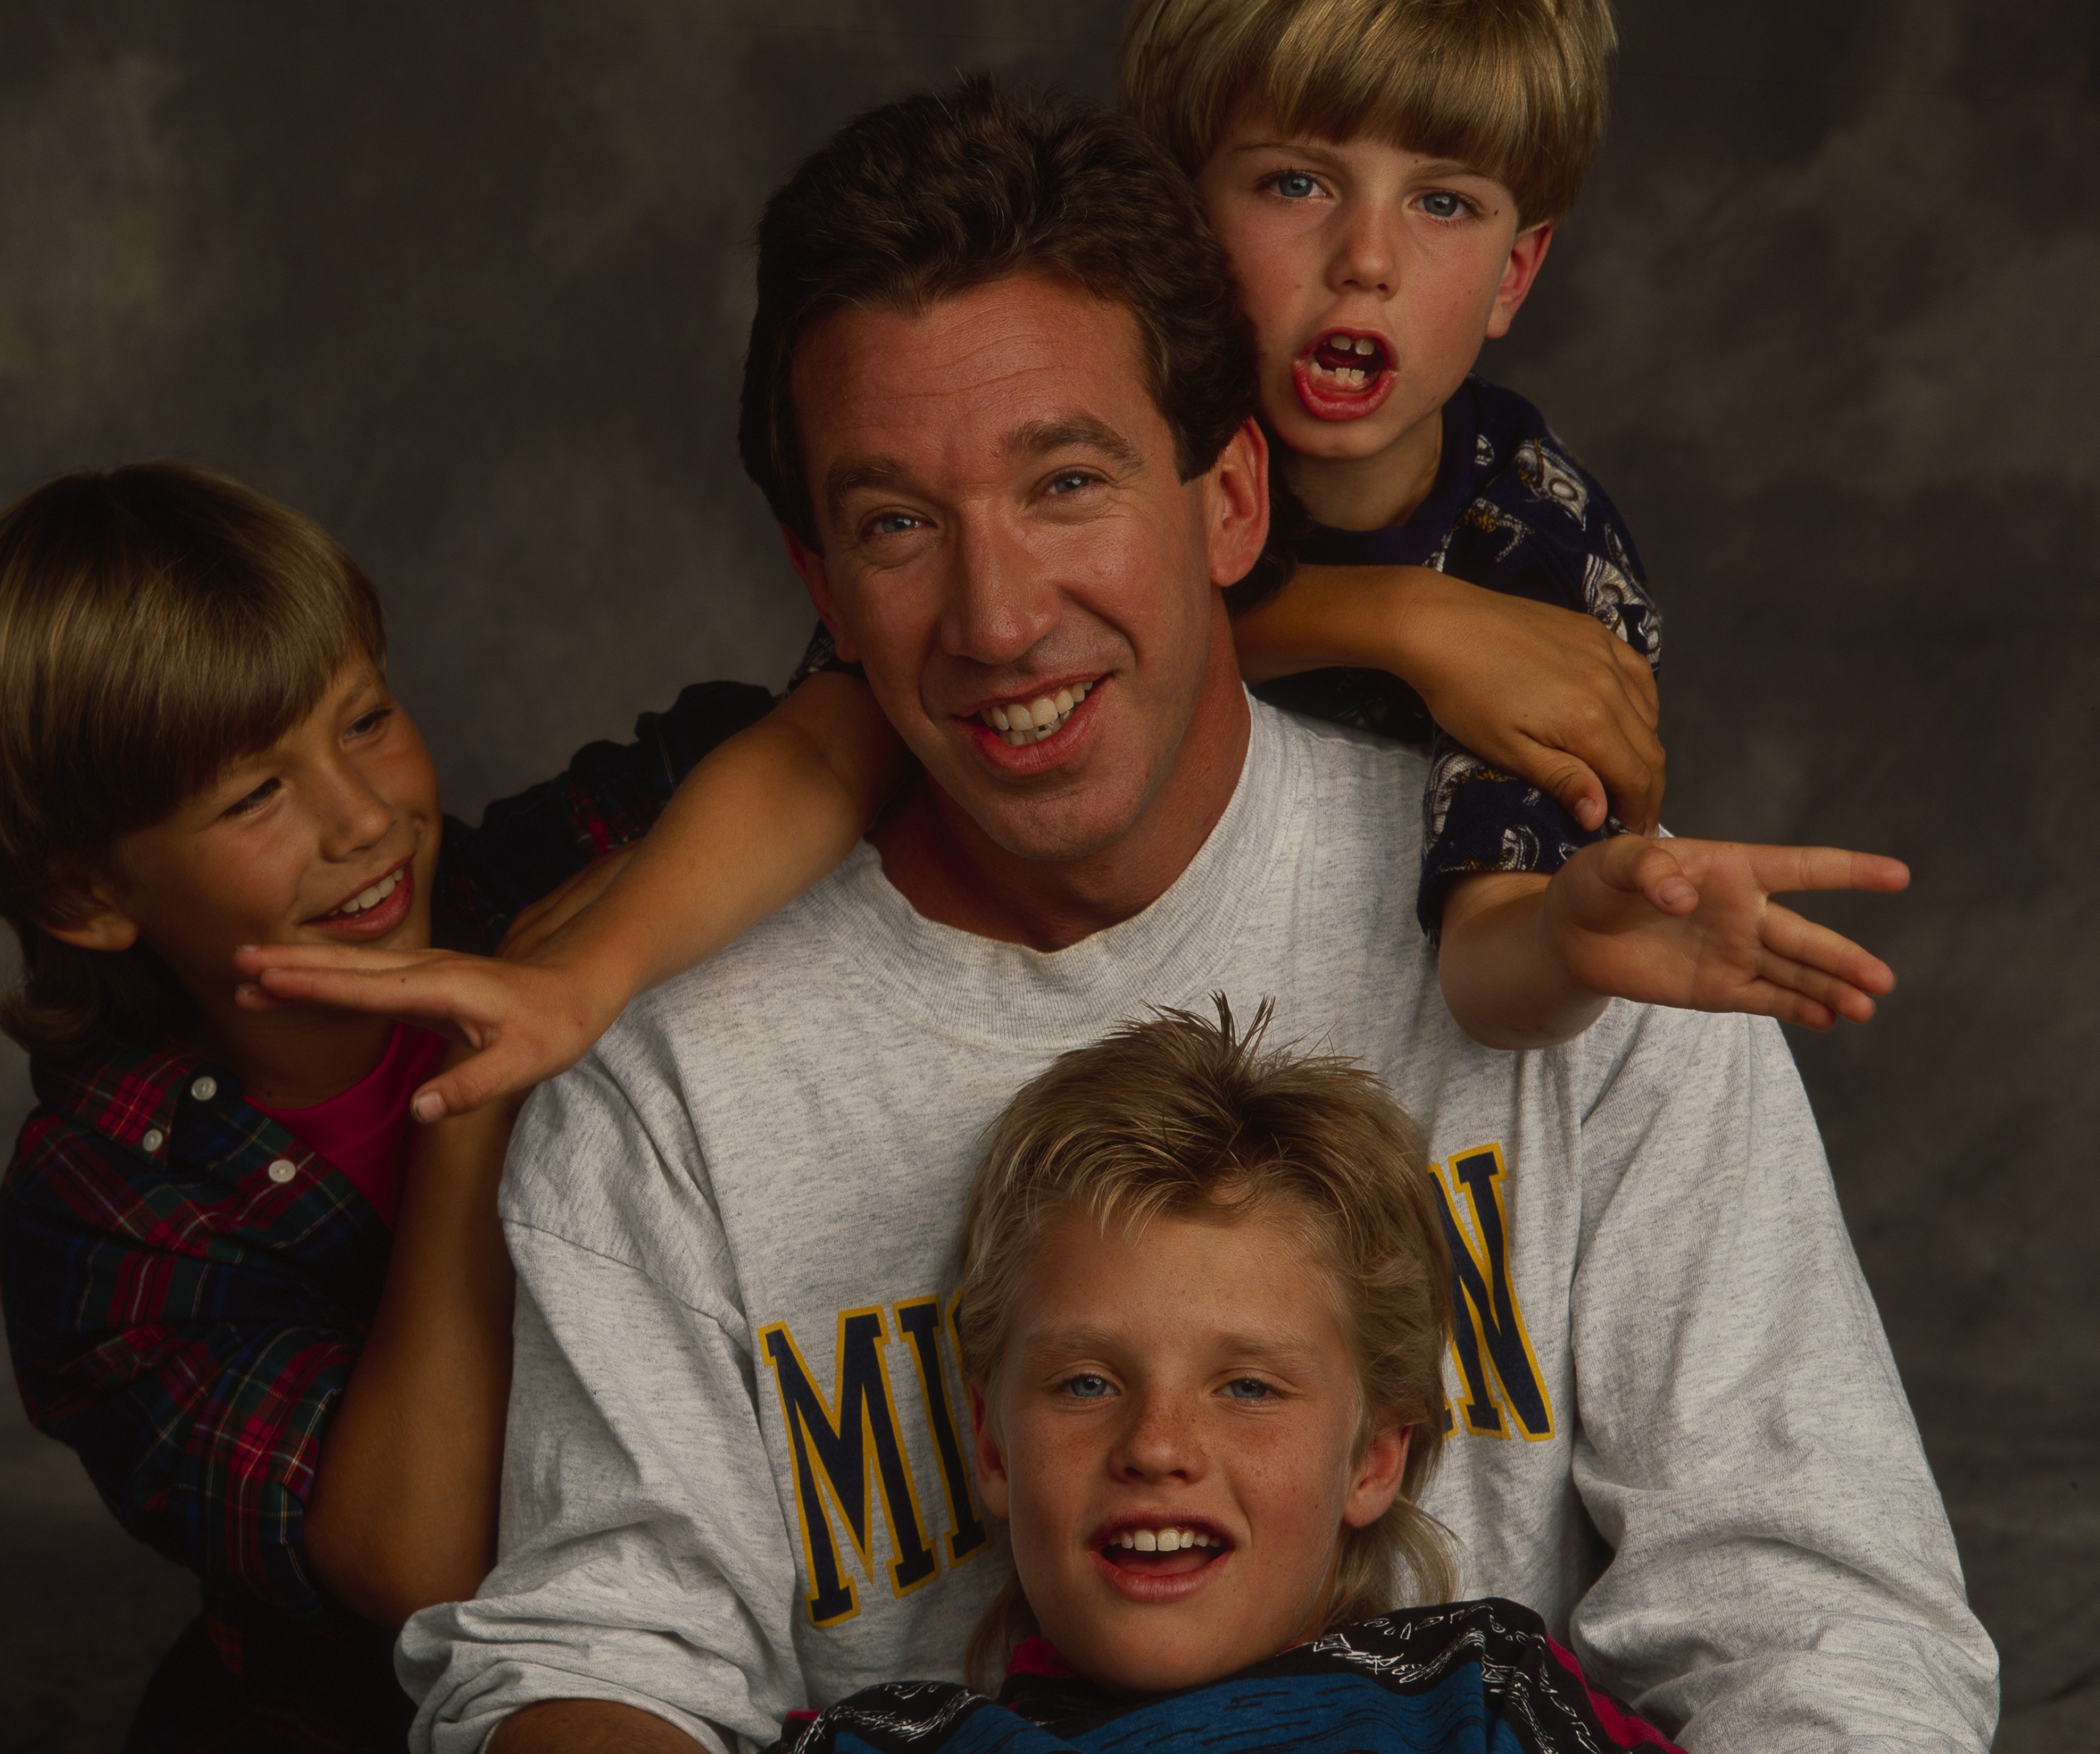 Zachery Tyler "Ty" Bryan, Tim Allen, Taran Noah Smith, and Jonathan Taylor Thomas on "Home Improvement" with a July 19, 1991, shoot date | Source: Getty Images